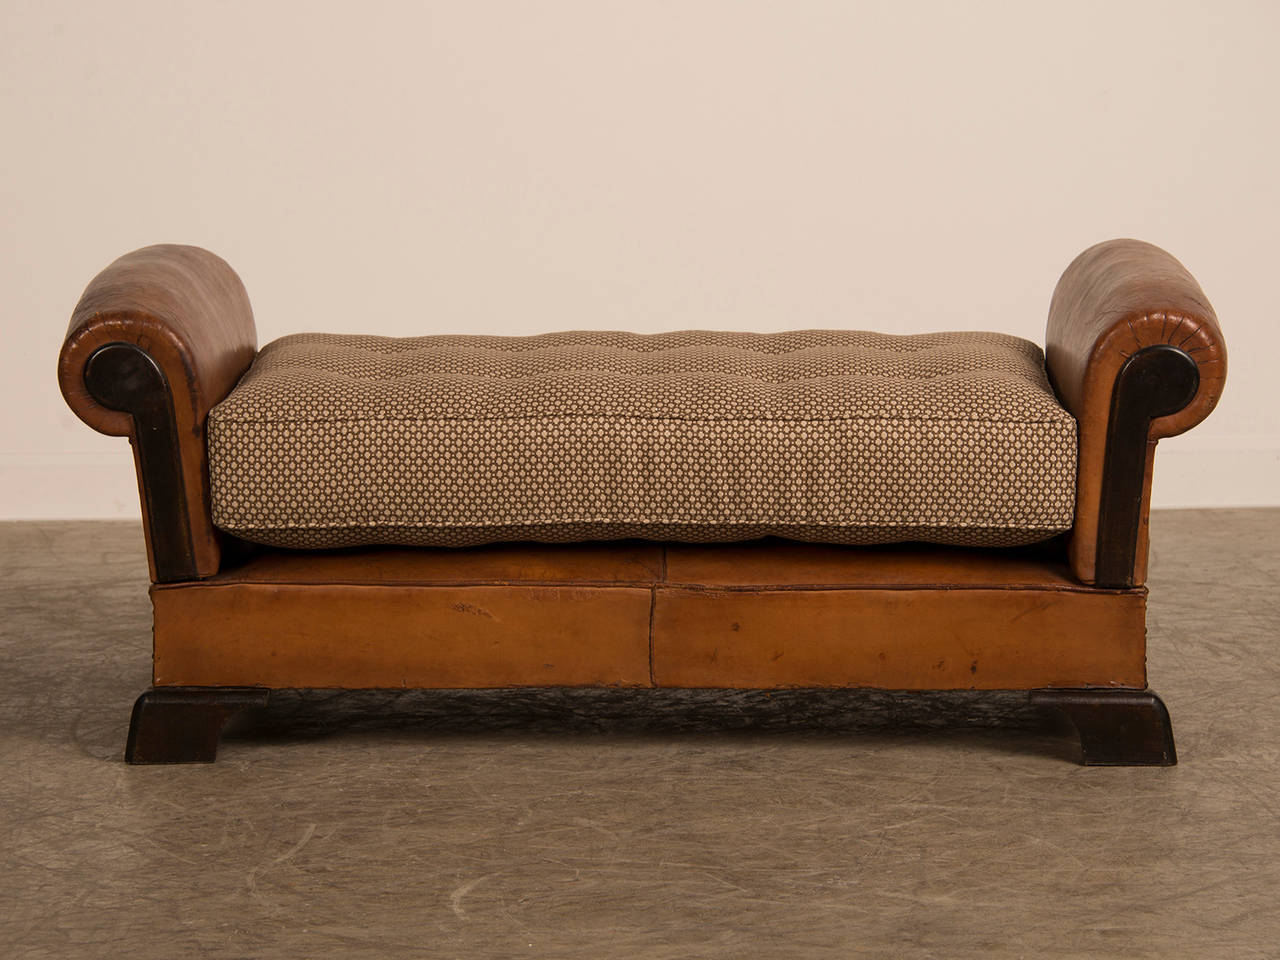 Mid-20th Century Art Deco Leather Day Bed, France circa 1930